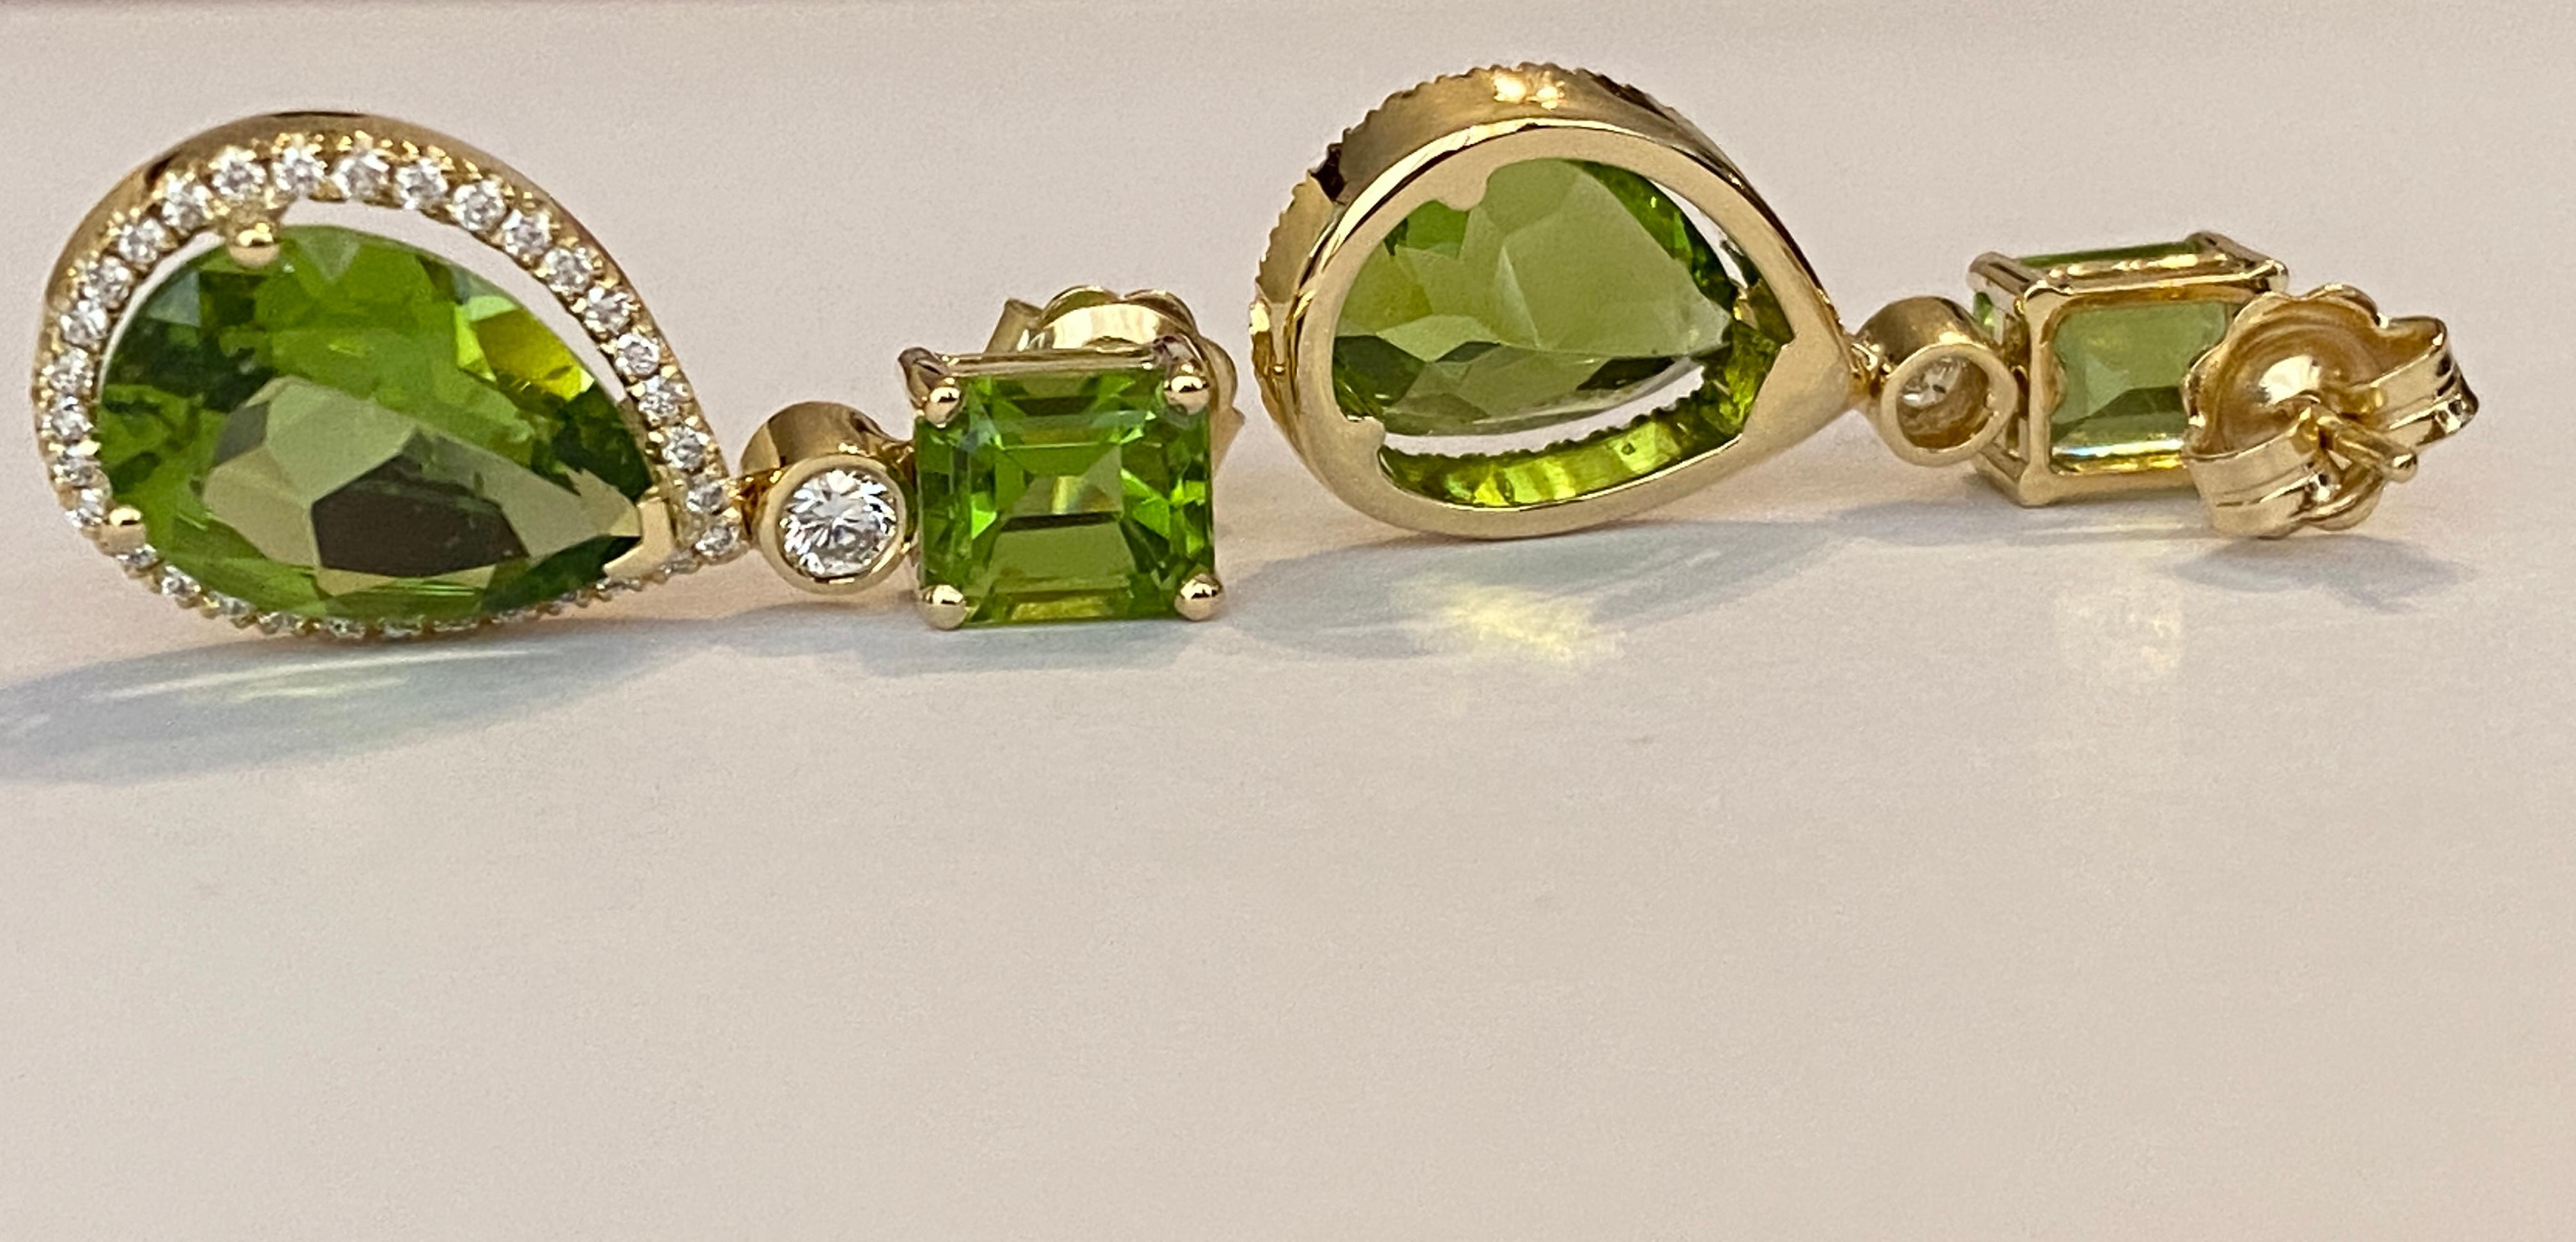 ALGT certified 18 kt gold Peridot Earrings with Diamonds For Sale 7